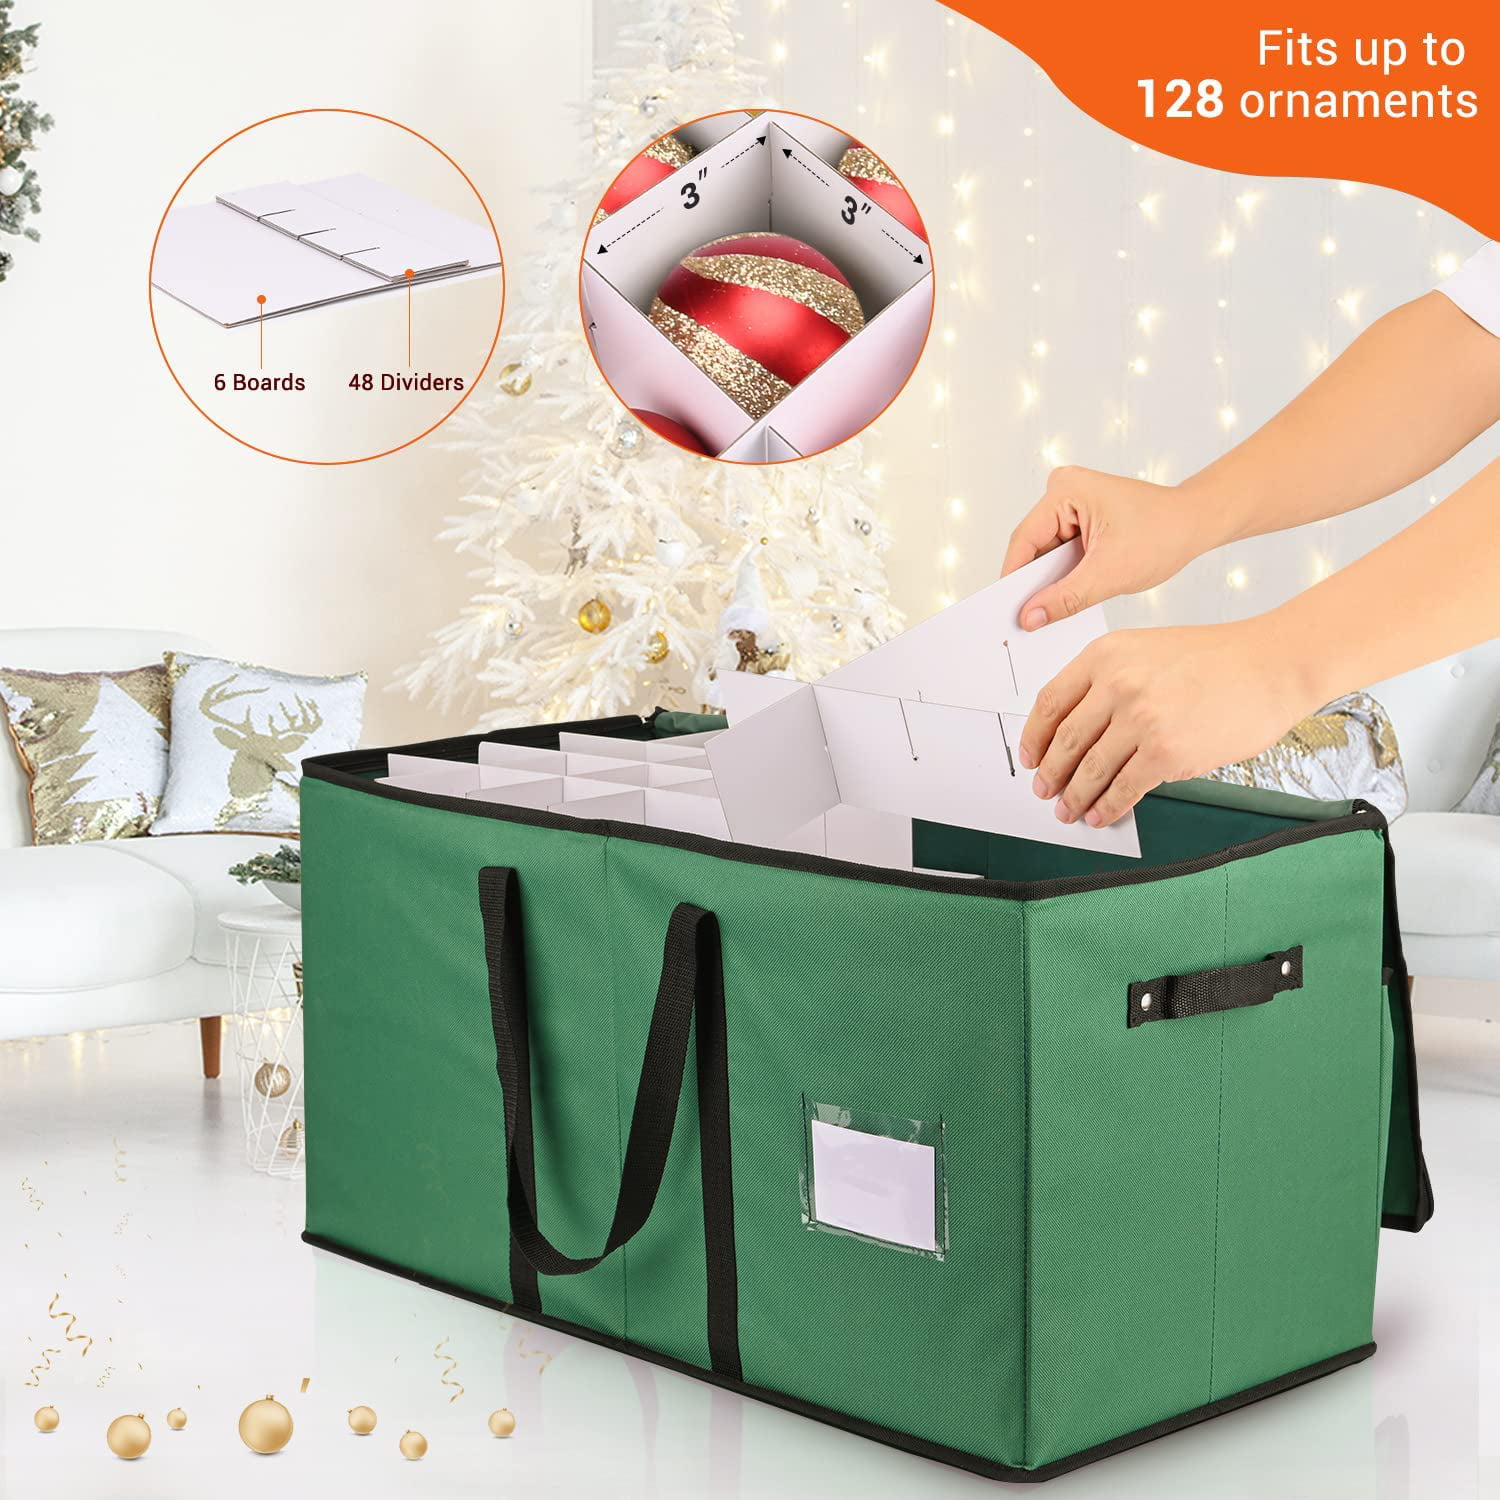 Phedrew Large Christmas Ornament Storage Container Box, Fits Up to 128 Ornaments, Holiday Xmas Ornaments Box with Zipper Closure